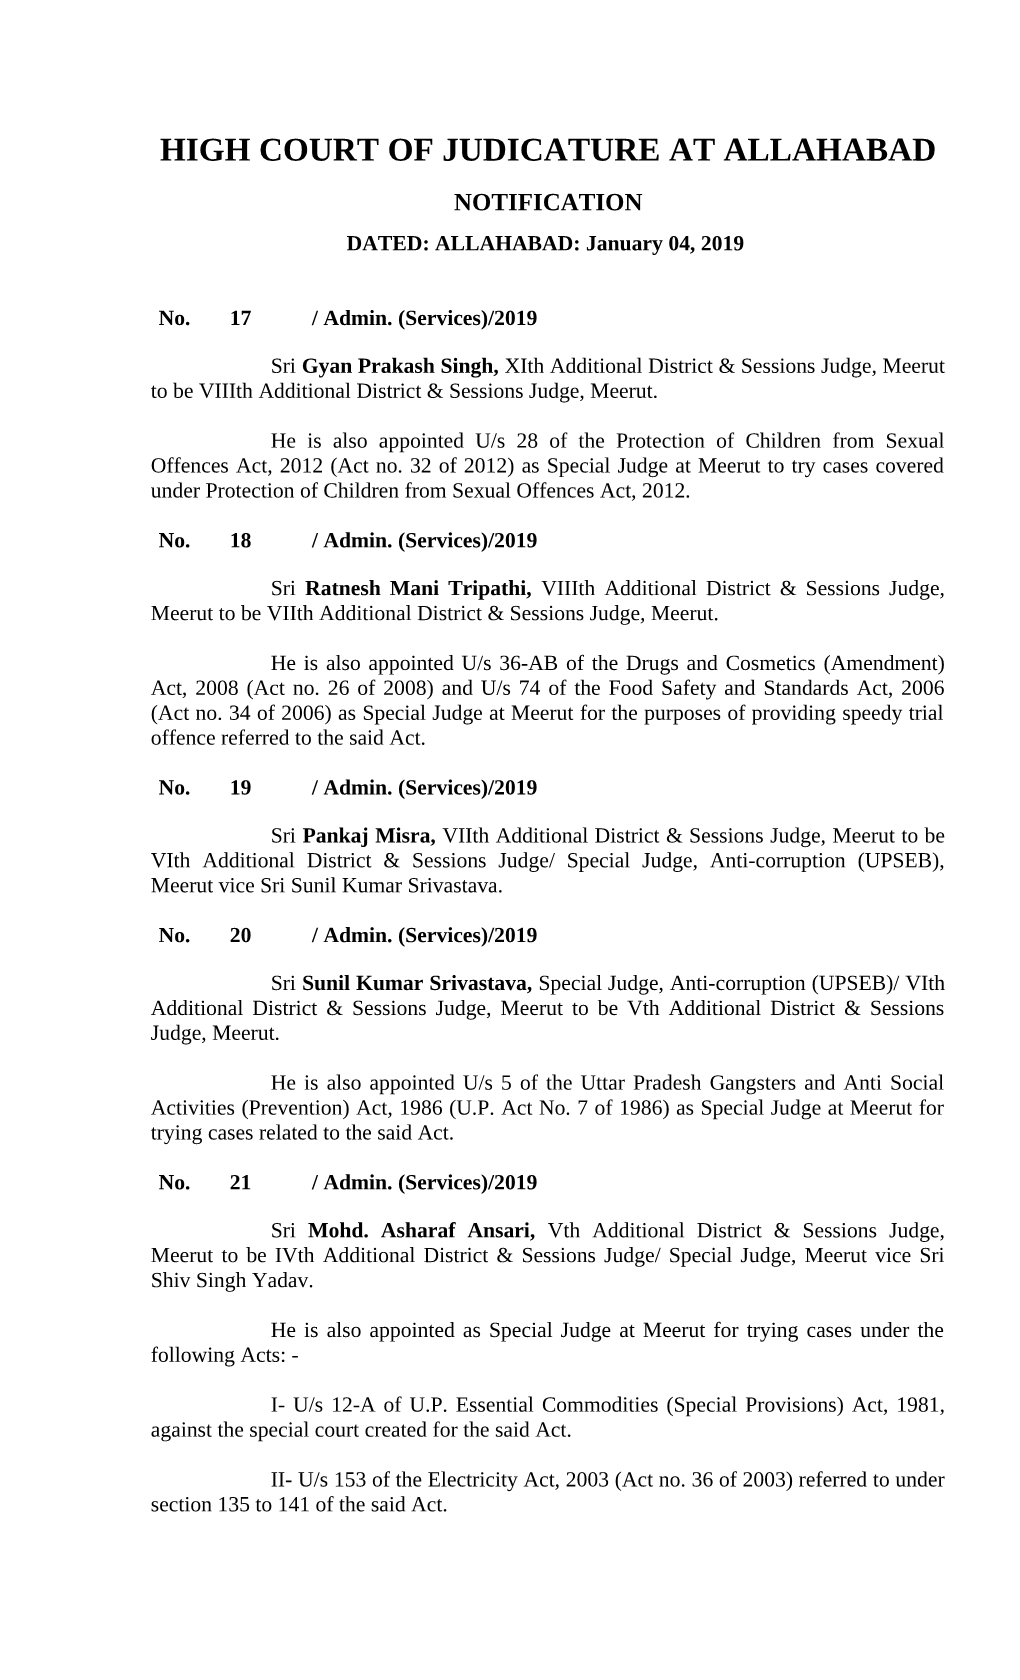 HIGH COURT of JUDICATURE at ALLAHABAD NOTIFICATION DATED: ALLAHABAD: January 04, 2019